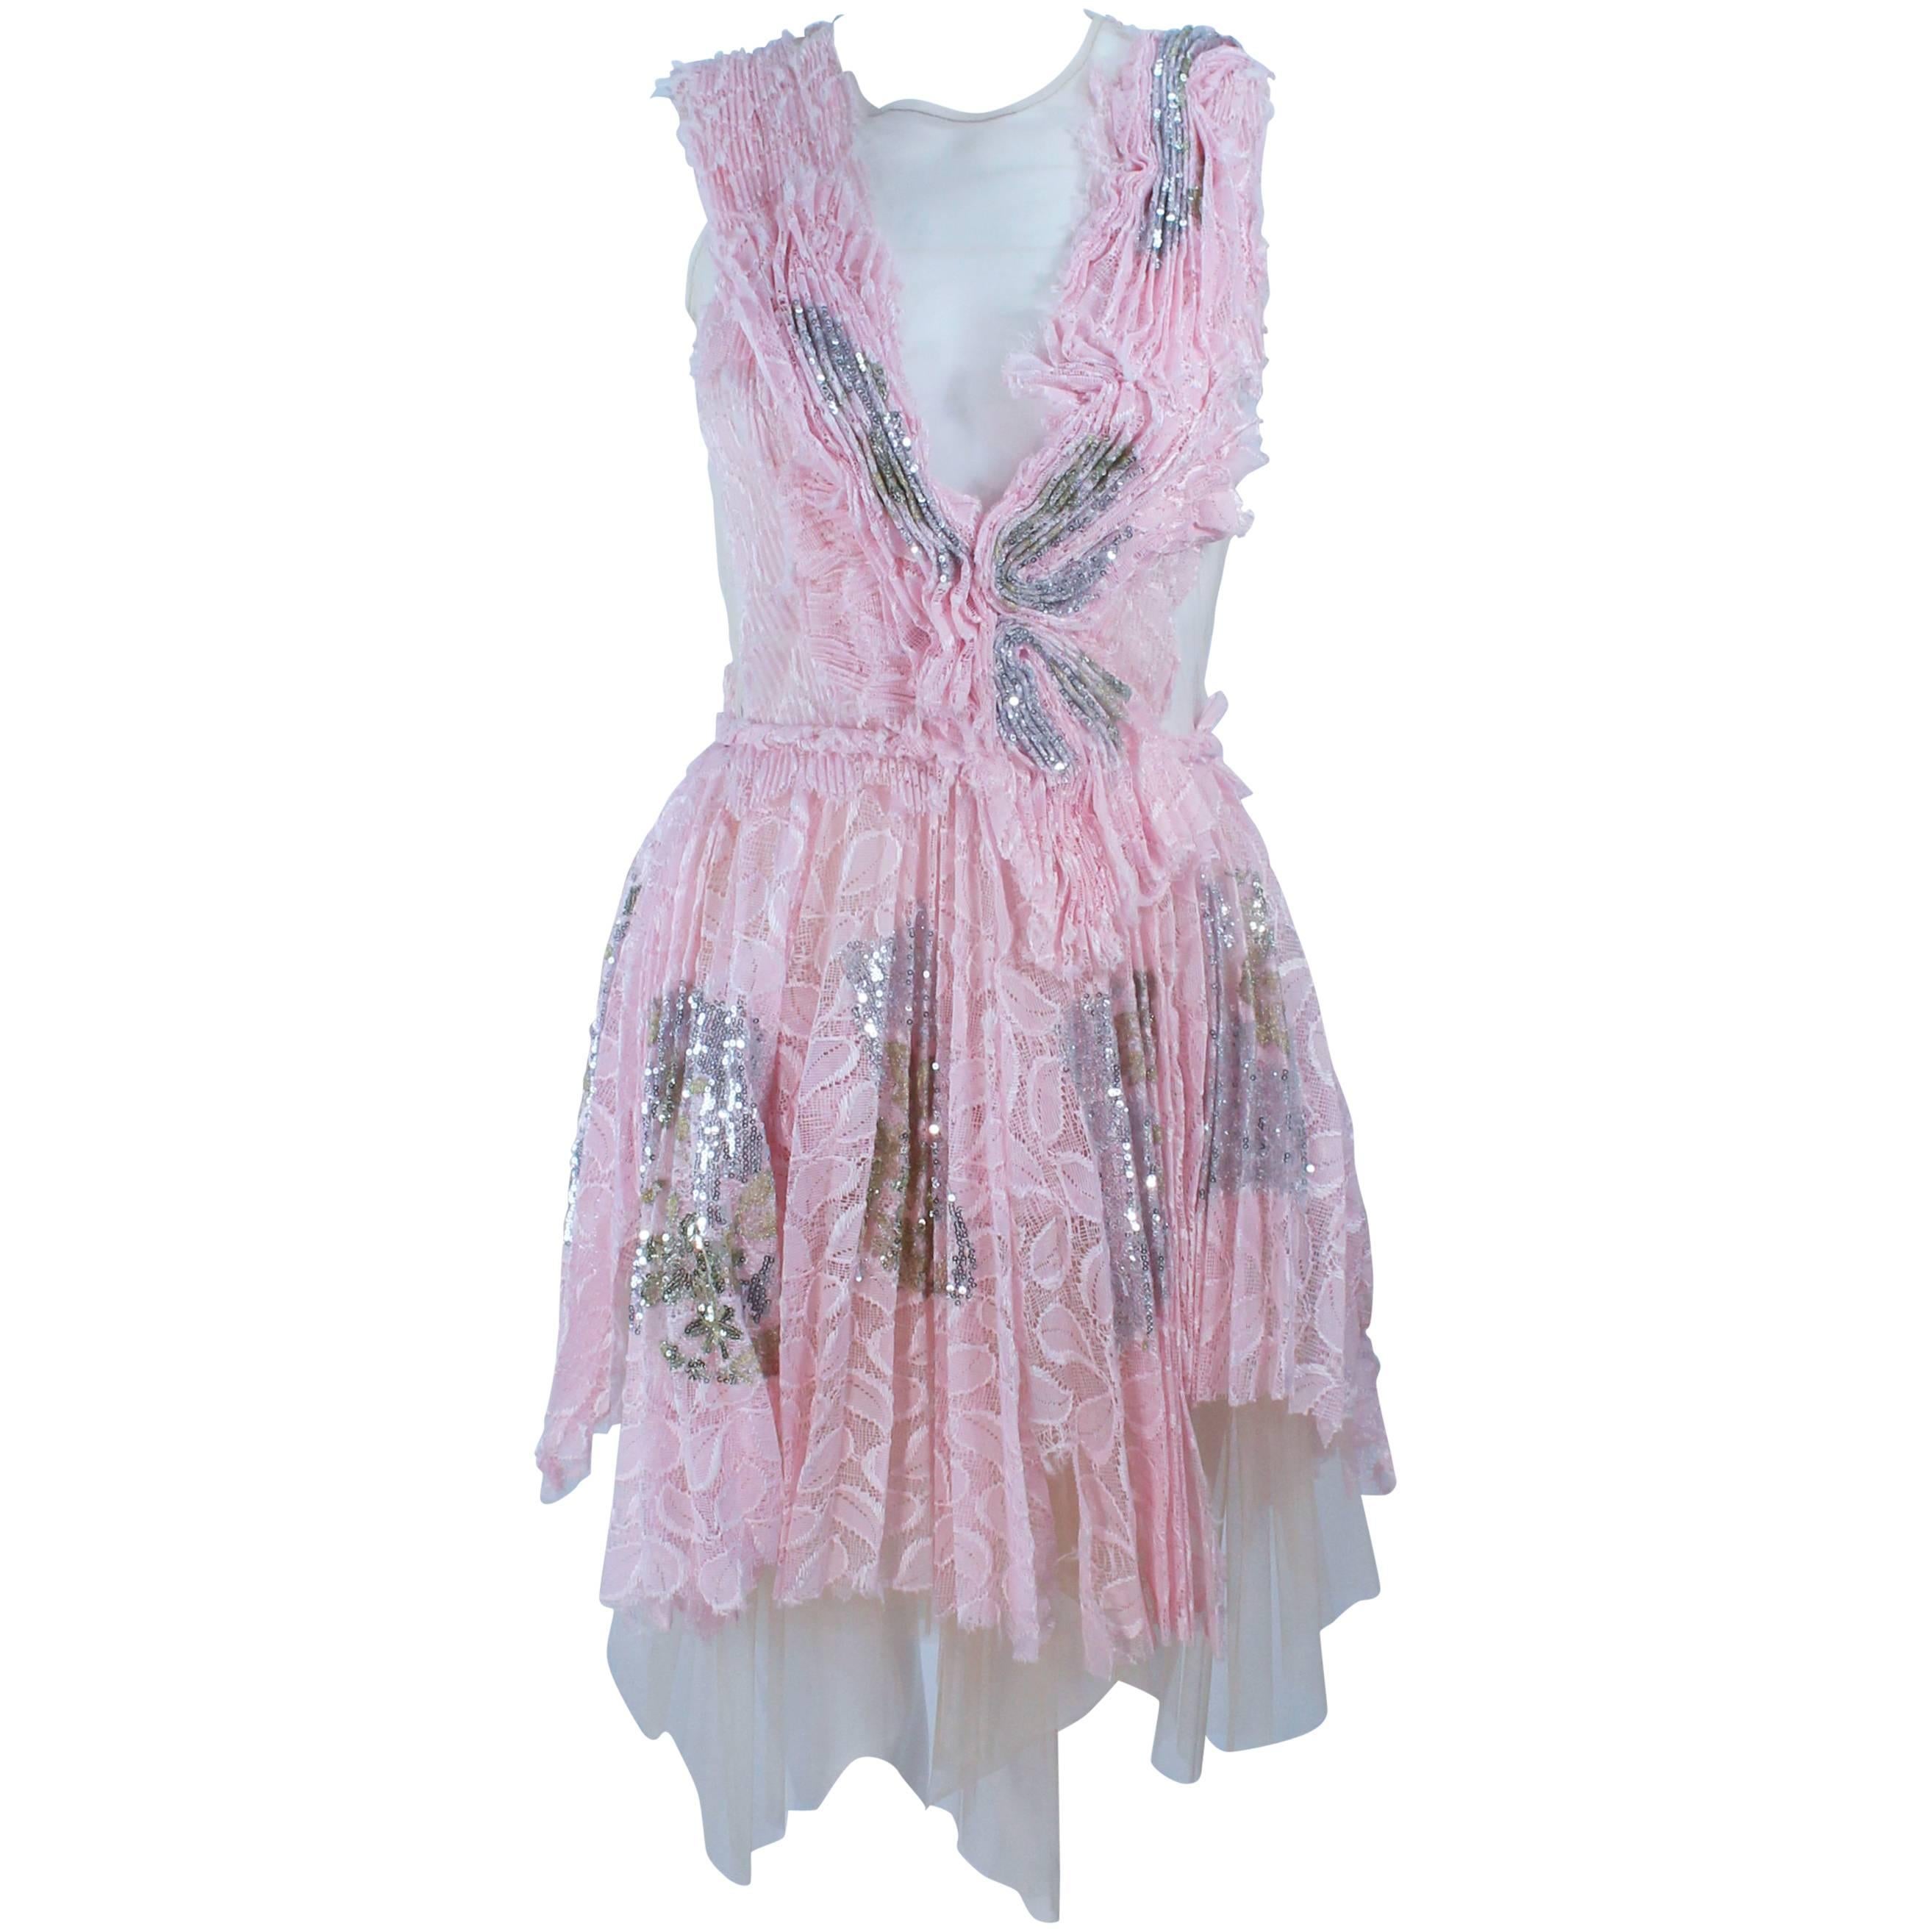 MORALES Sheer Pink Applique Cocktail Dress with Sequins Size 2 For Sale